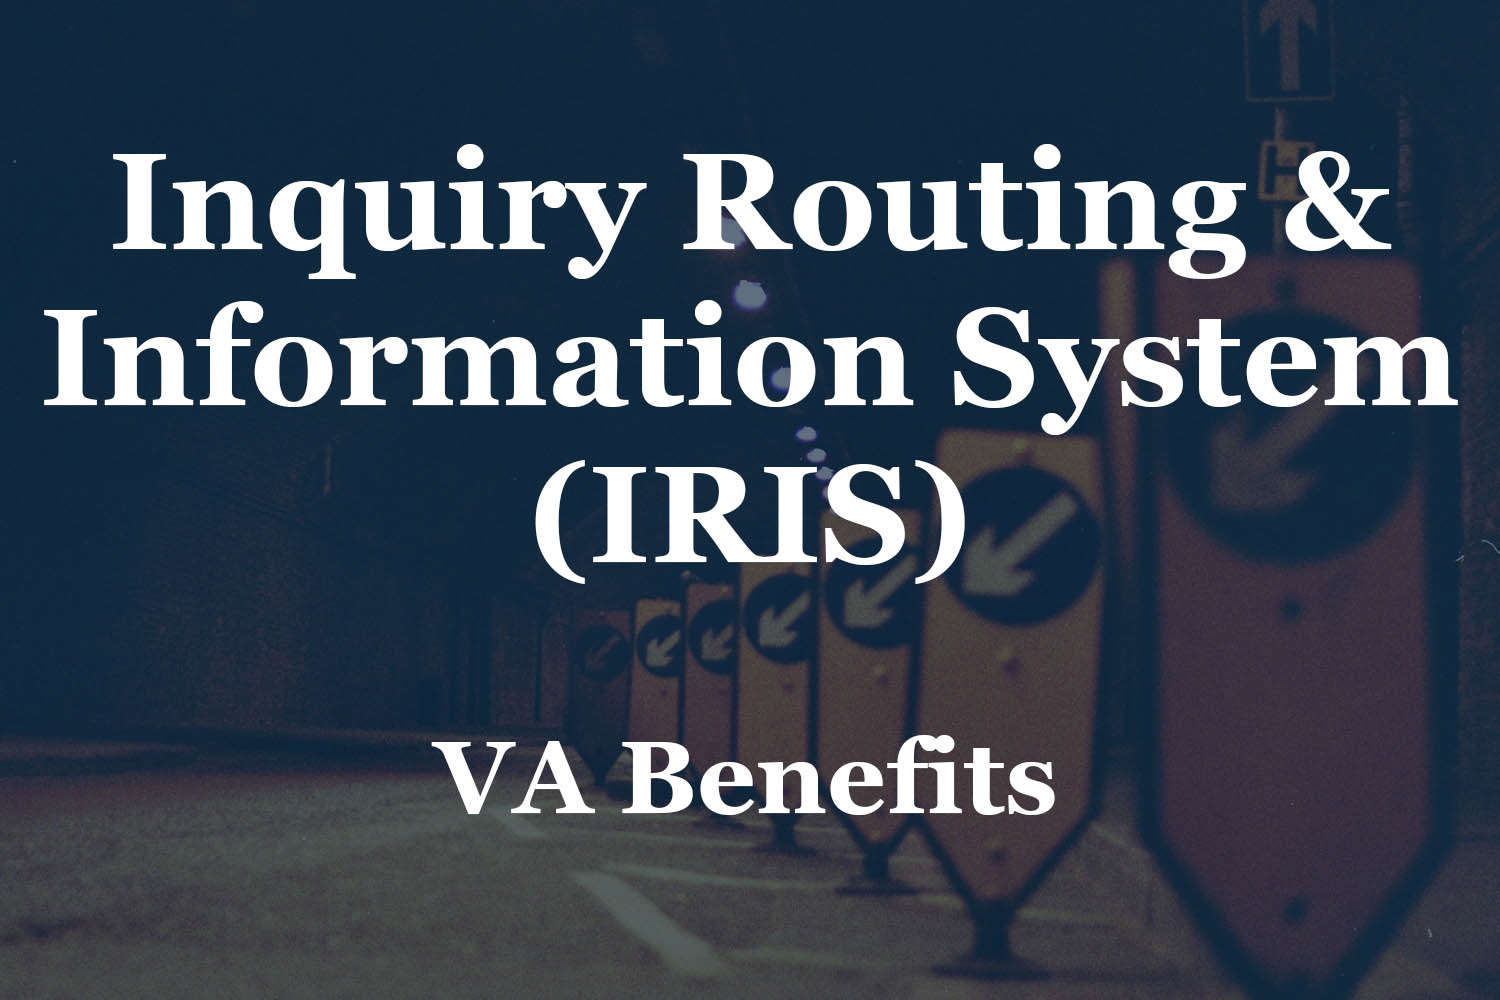 Inquiry Routing & Information System (IRIS) Access to VA Benefits